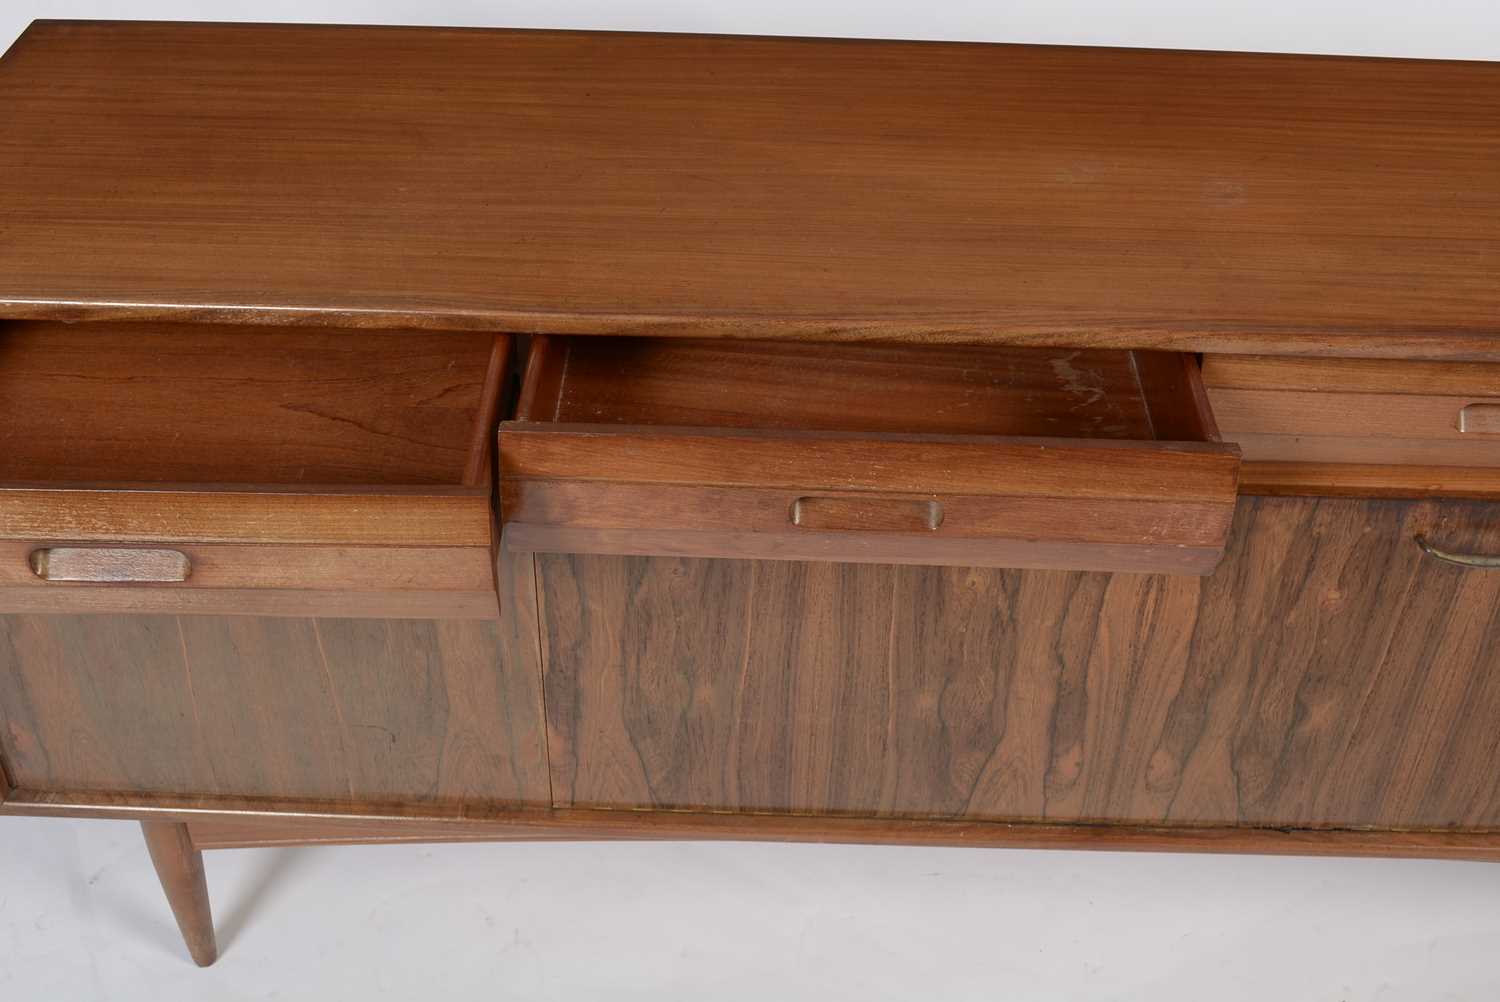 A mid Century teak and rosewood sideboard, possible by Elliotts of Newbury - Image 5 of 16